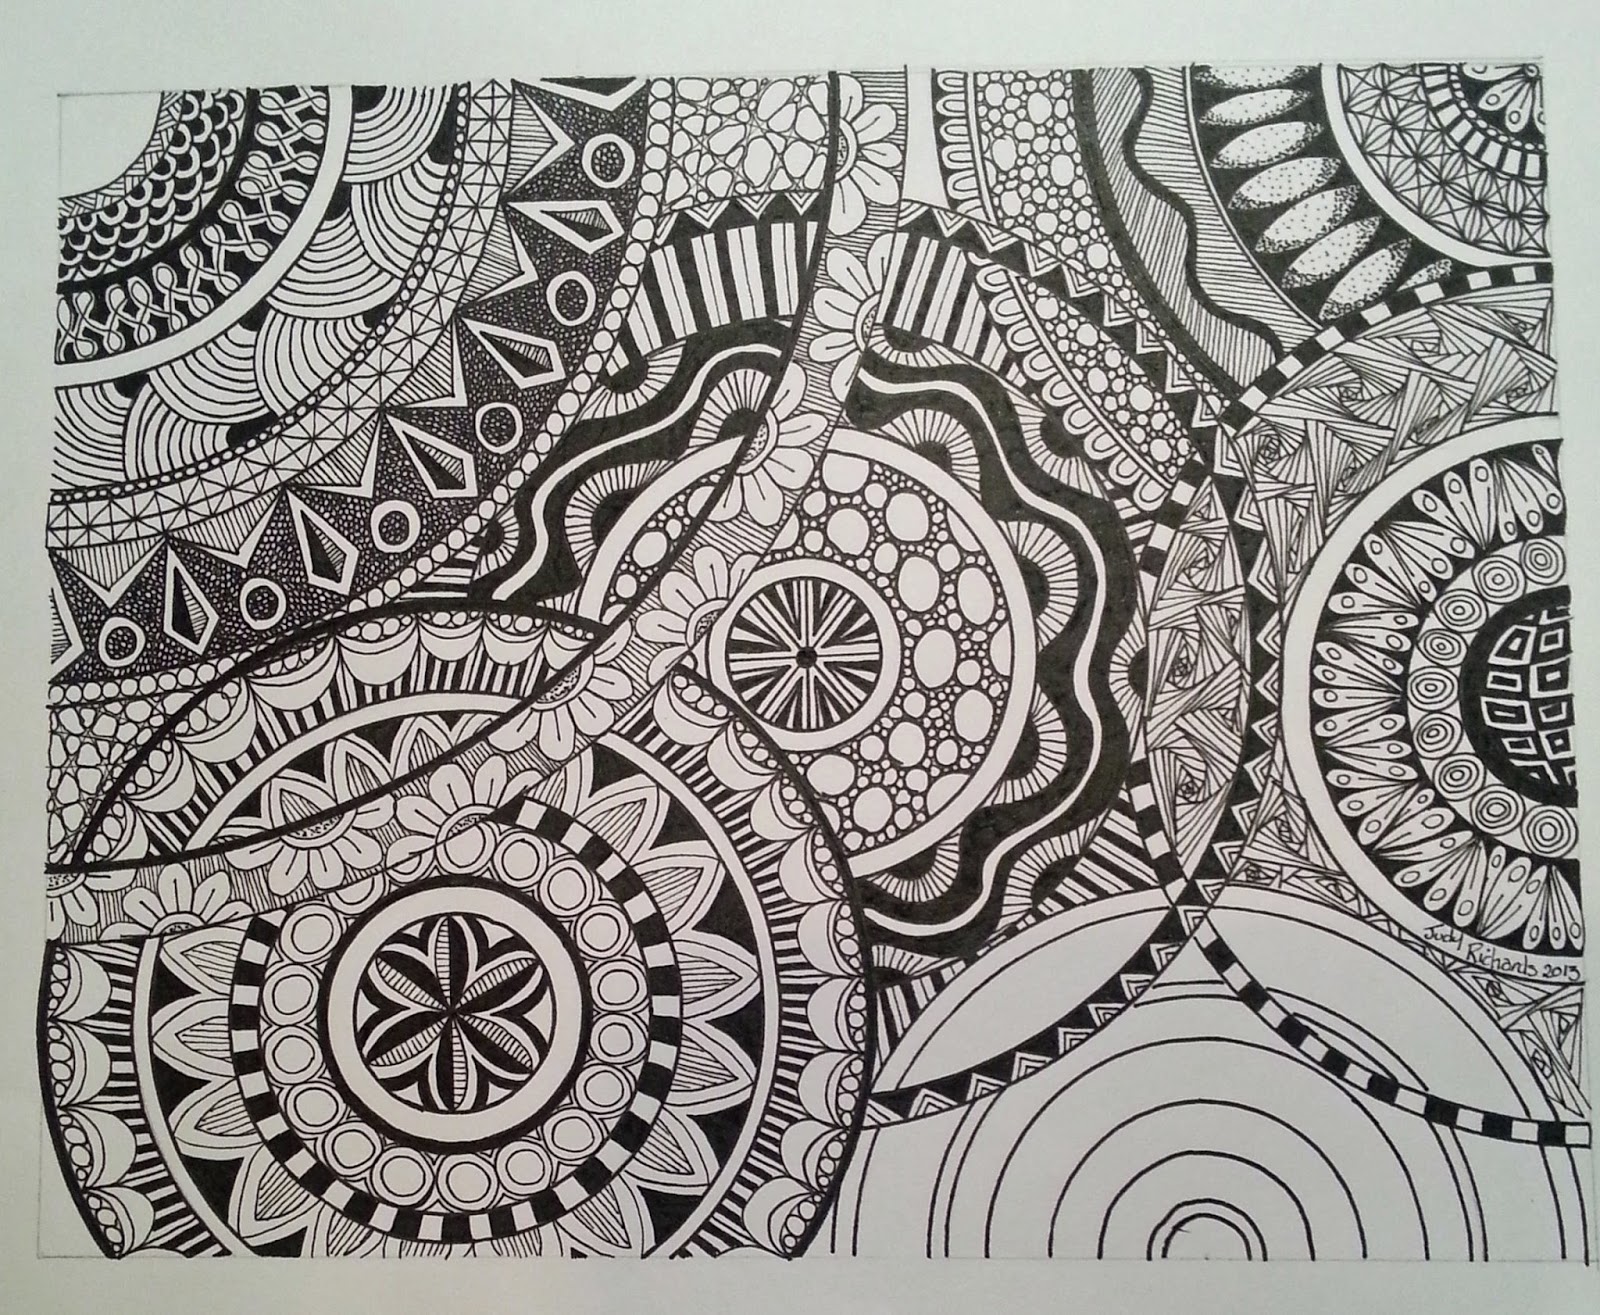 Image of doodle art with lines